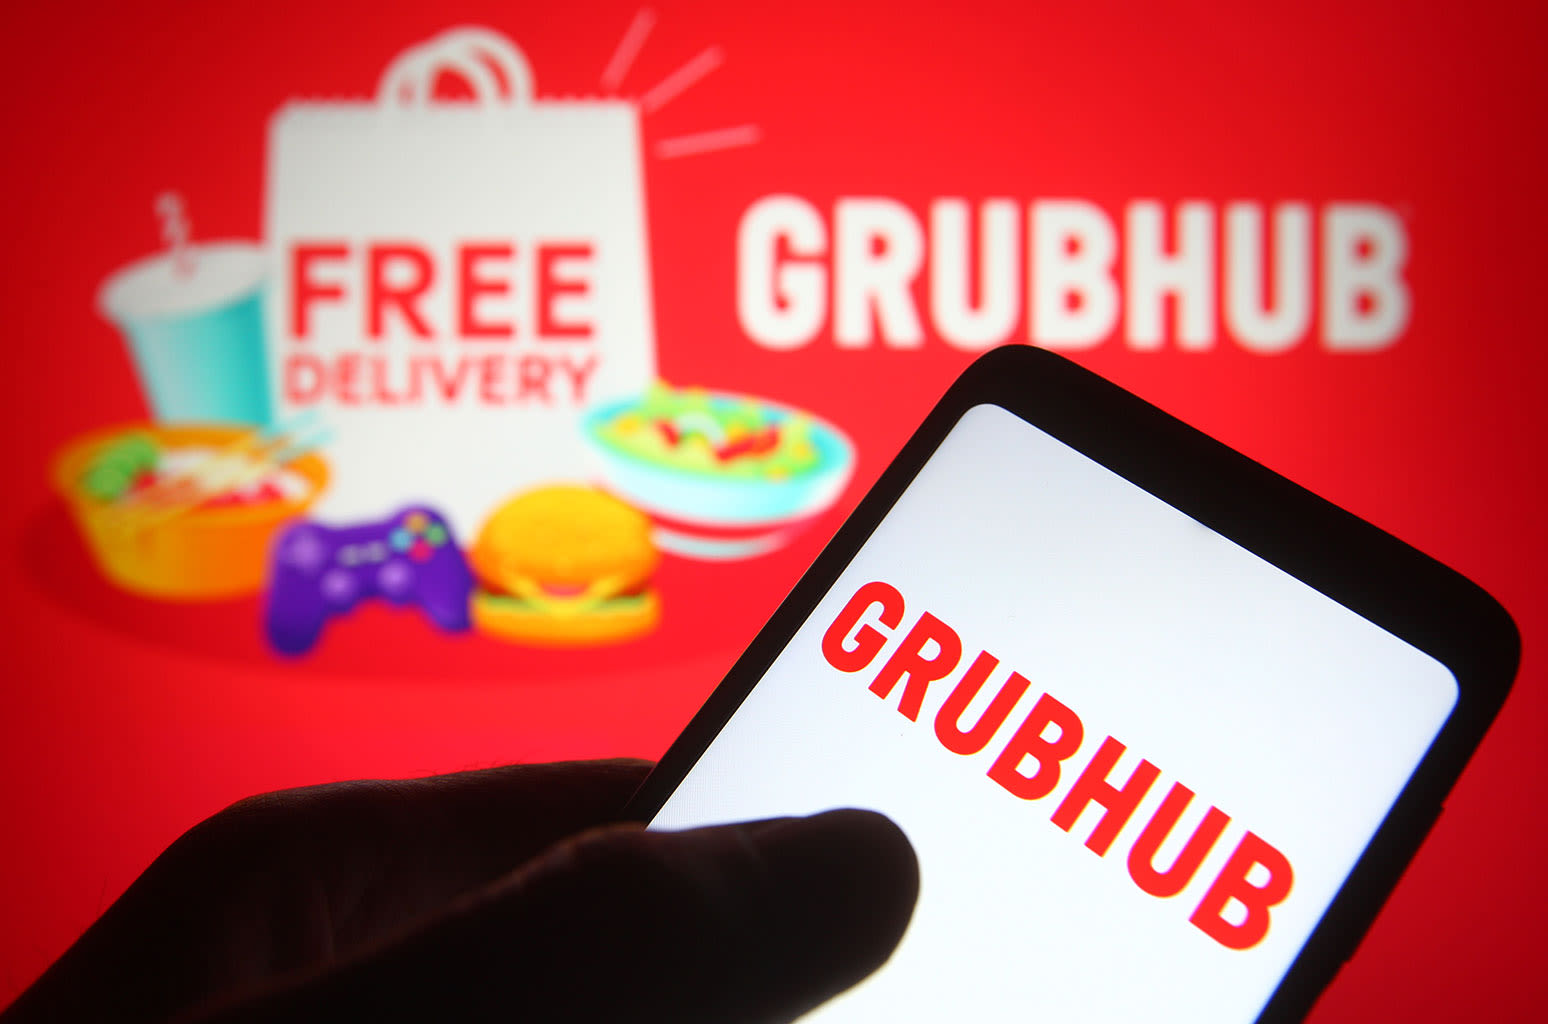 Amazon Is Offering Free Grubhub+ to Prime Members: How to Redeem